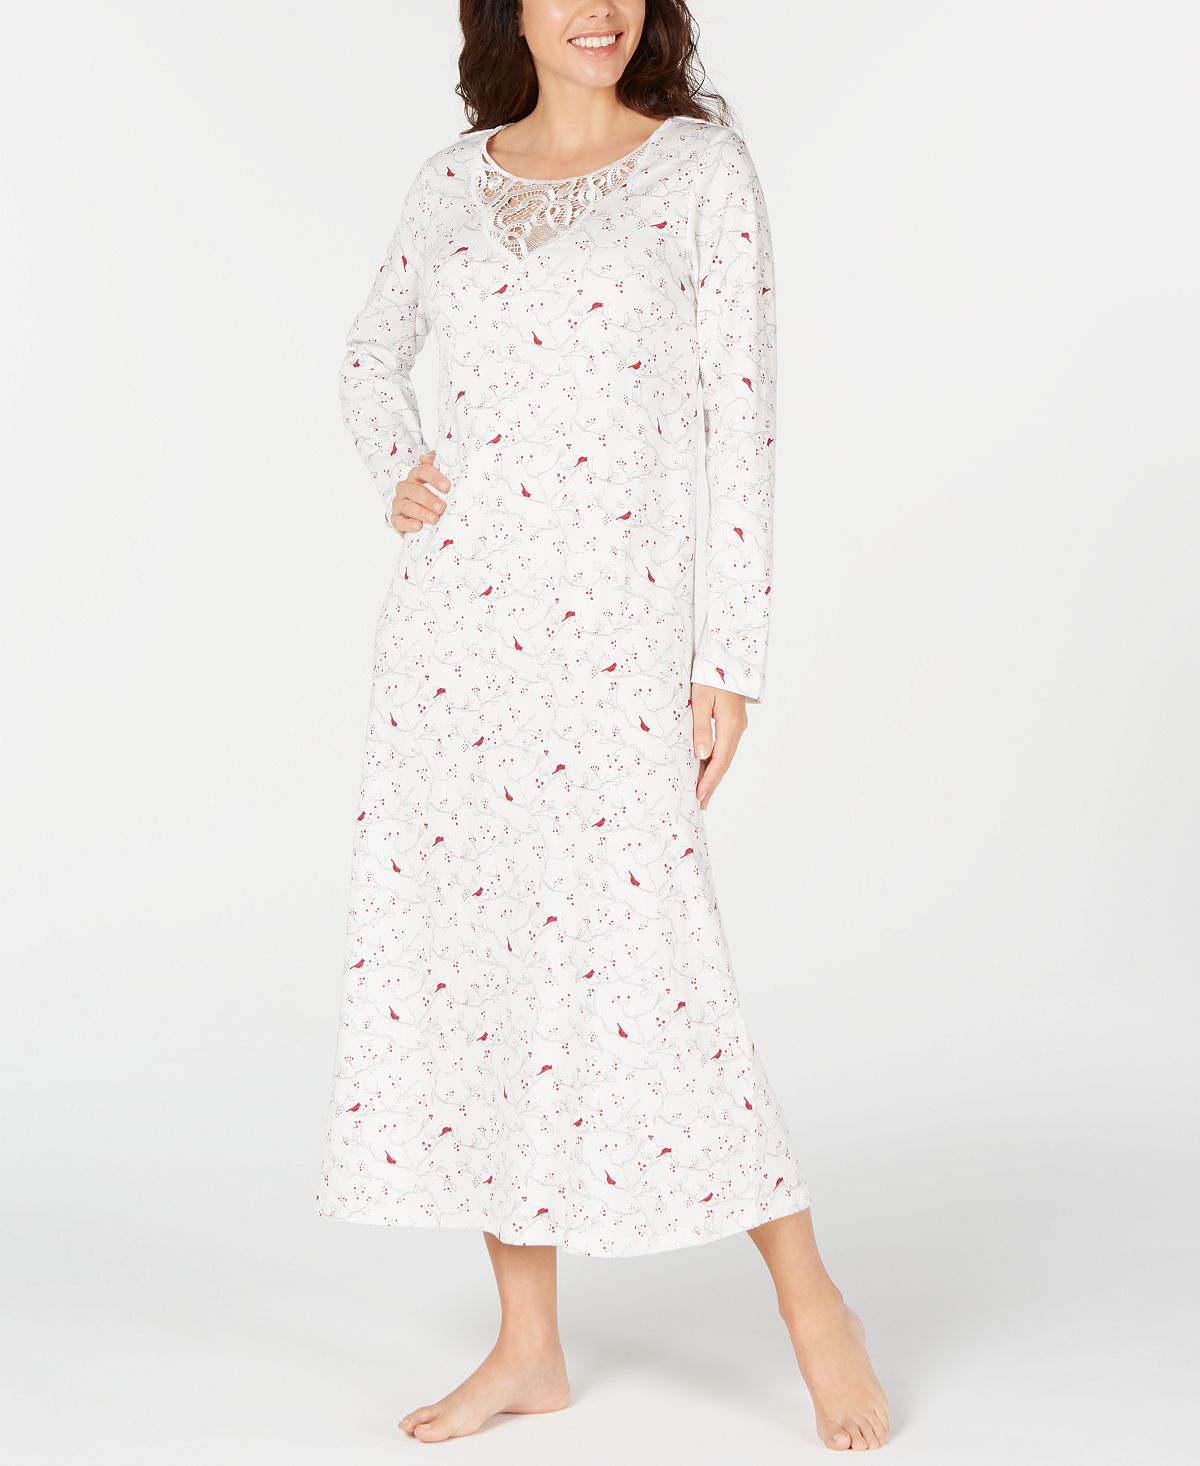 Charter Club Cotton Lace-trim Printed Nightgown Cardinal